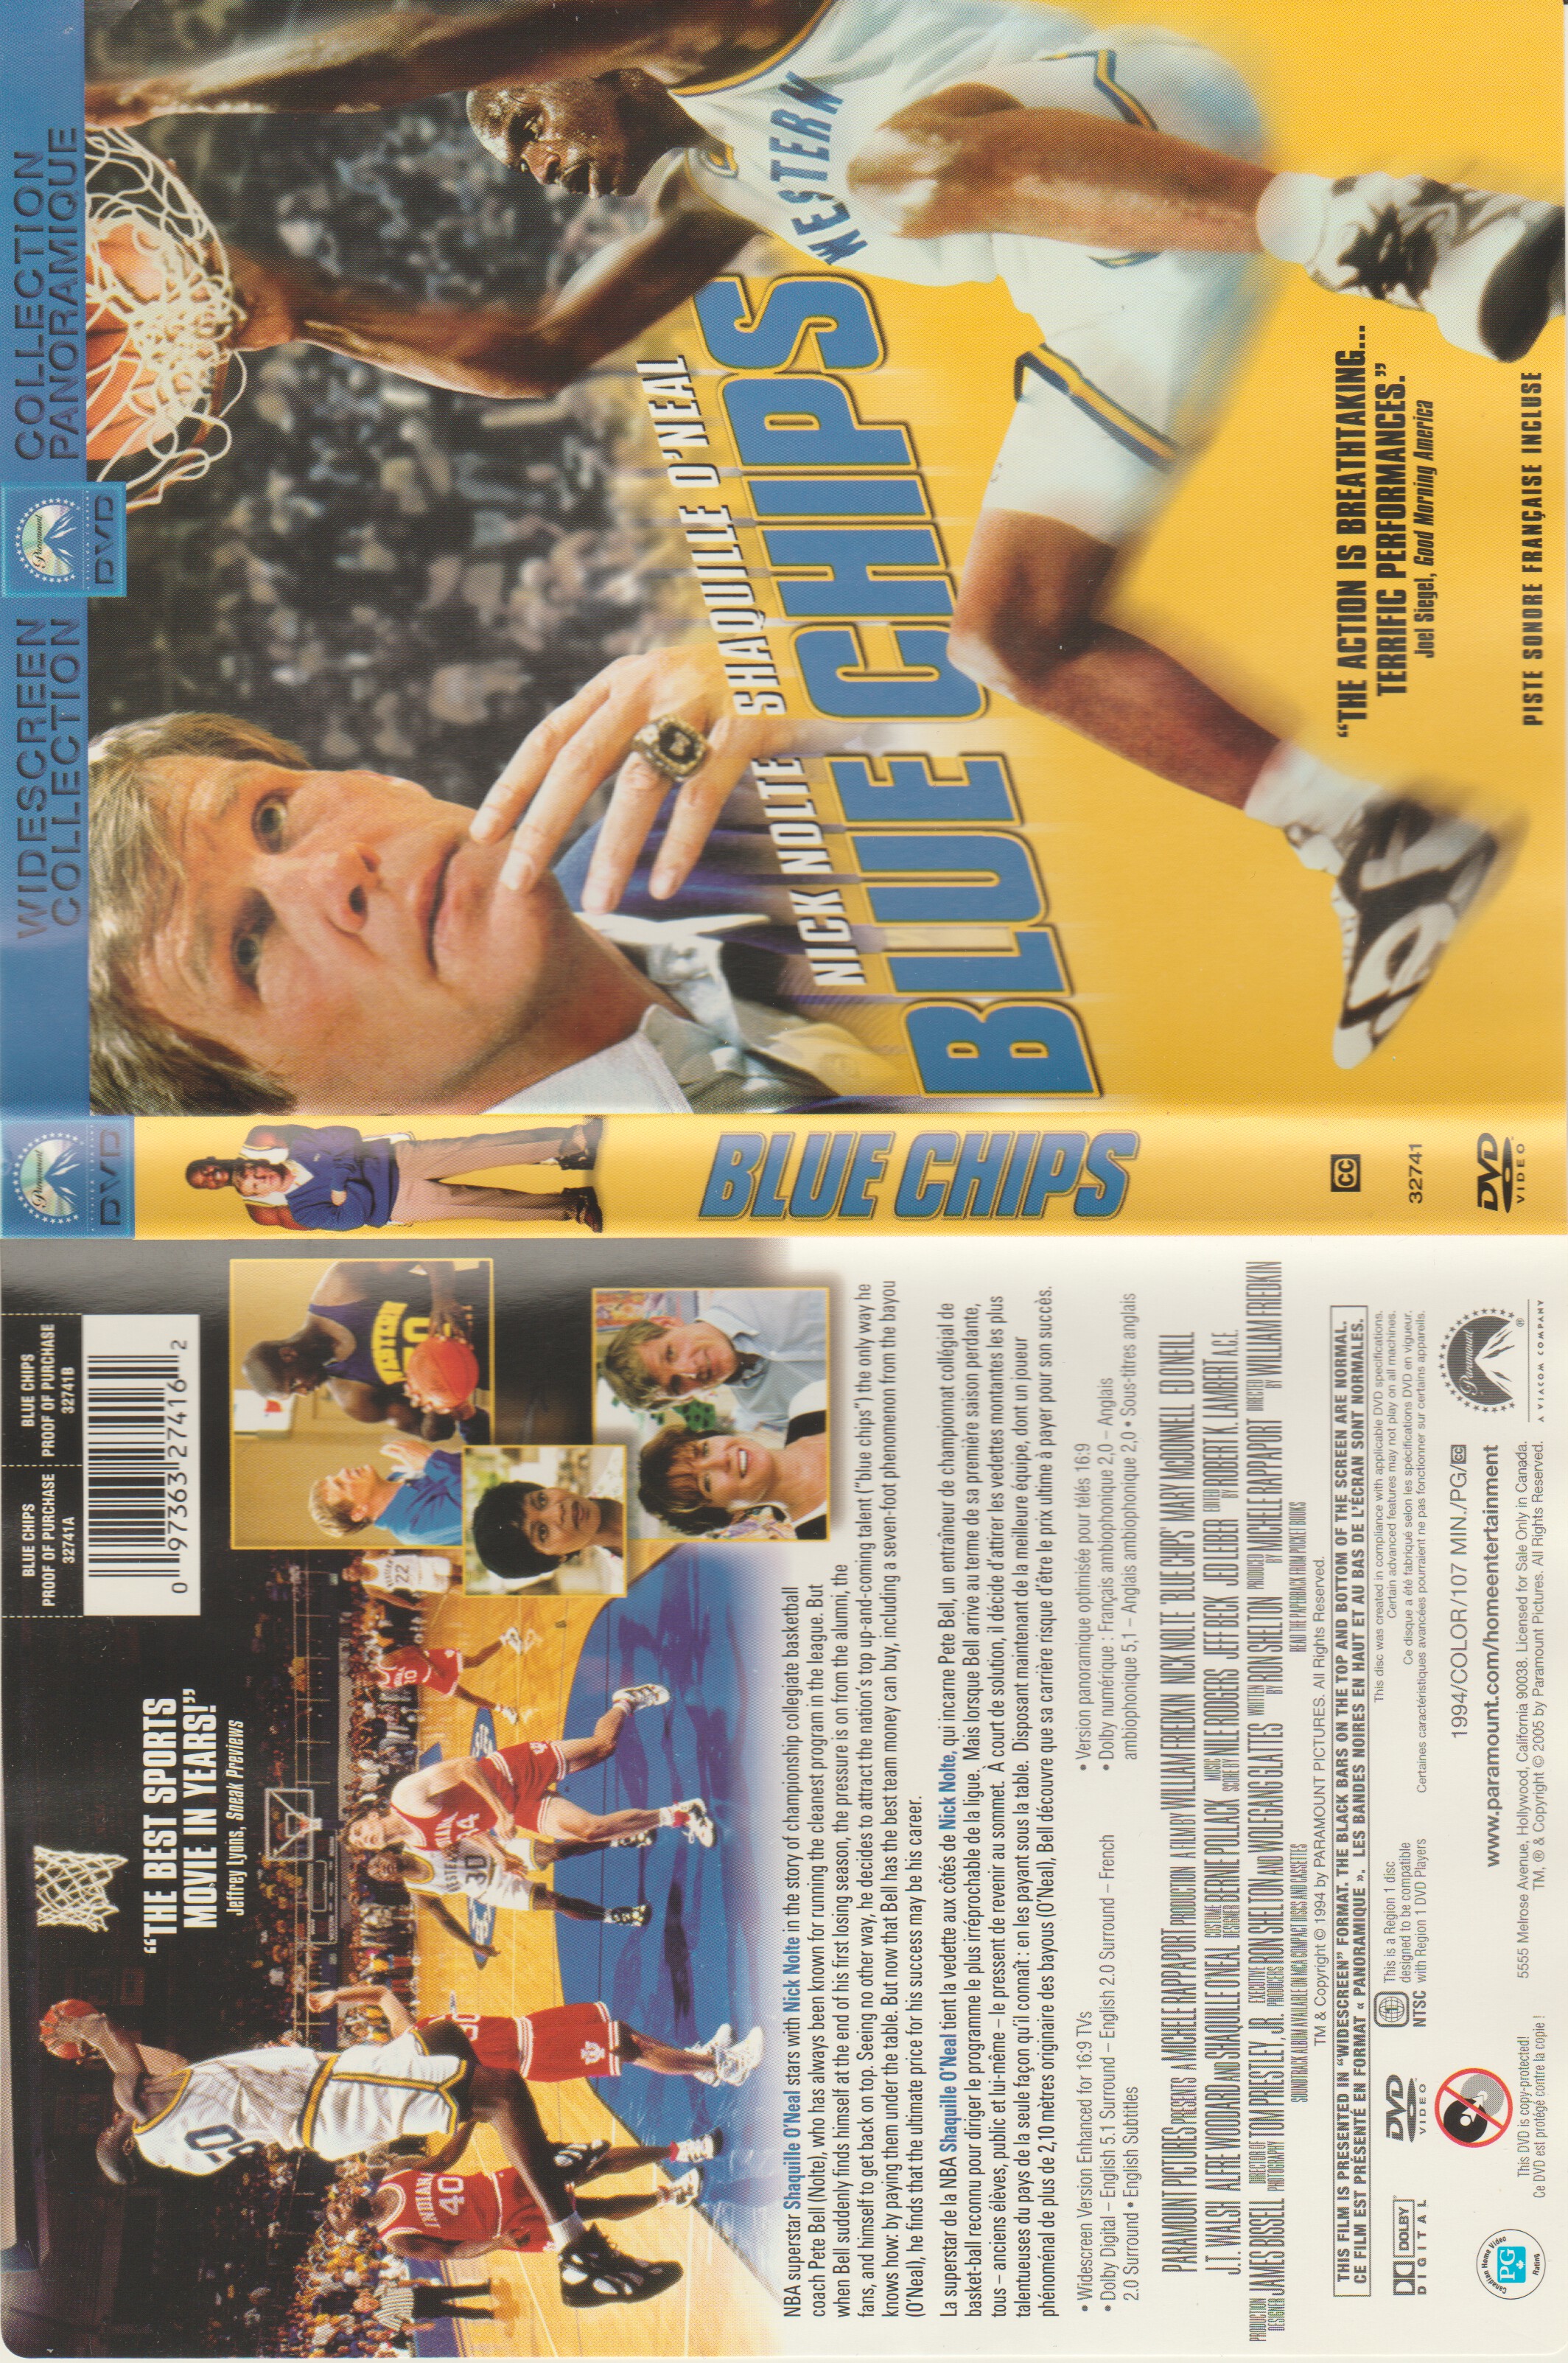 Jaquette DVD Blue chips (Canadienne)